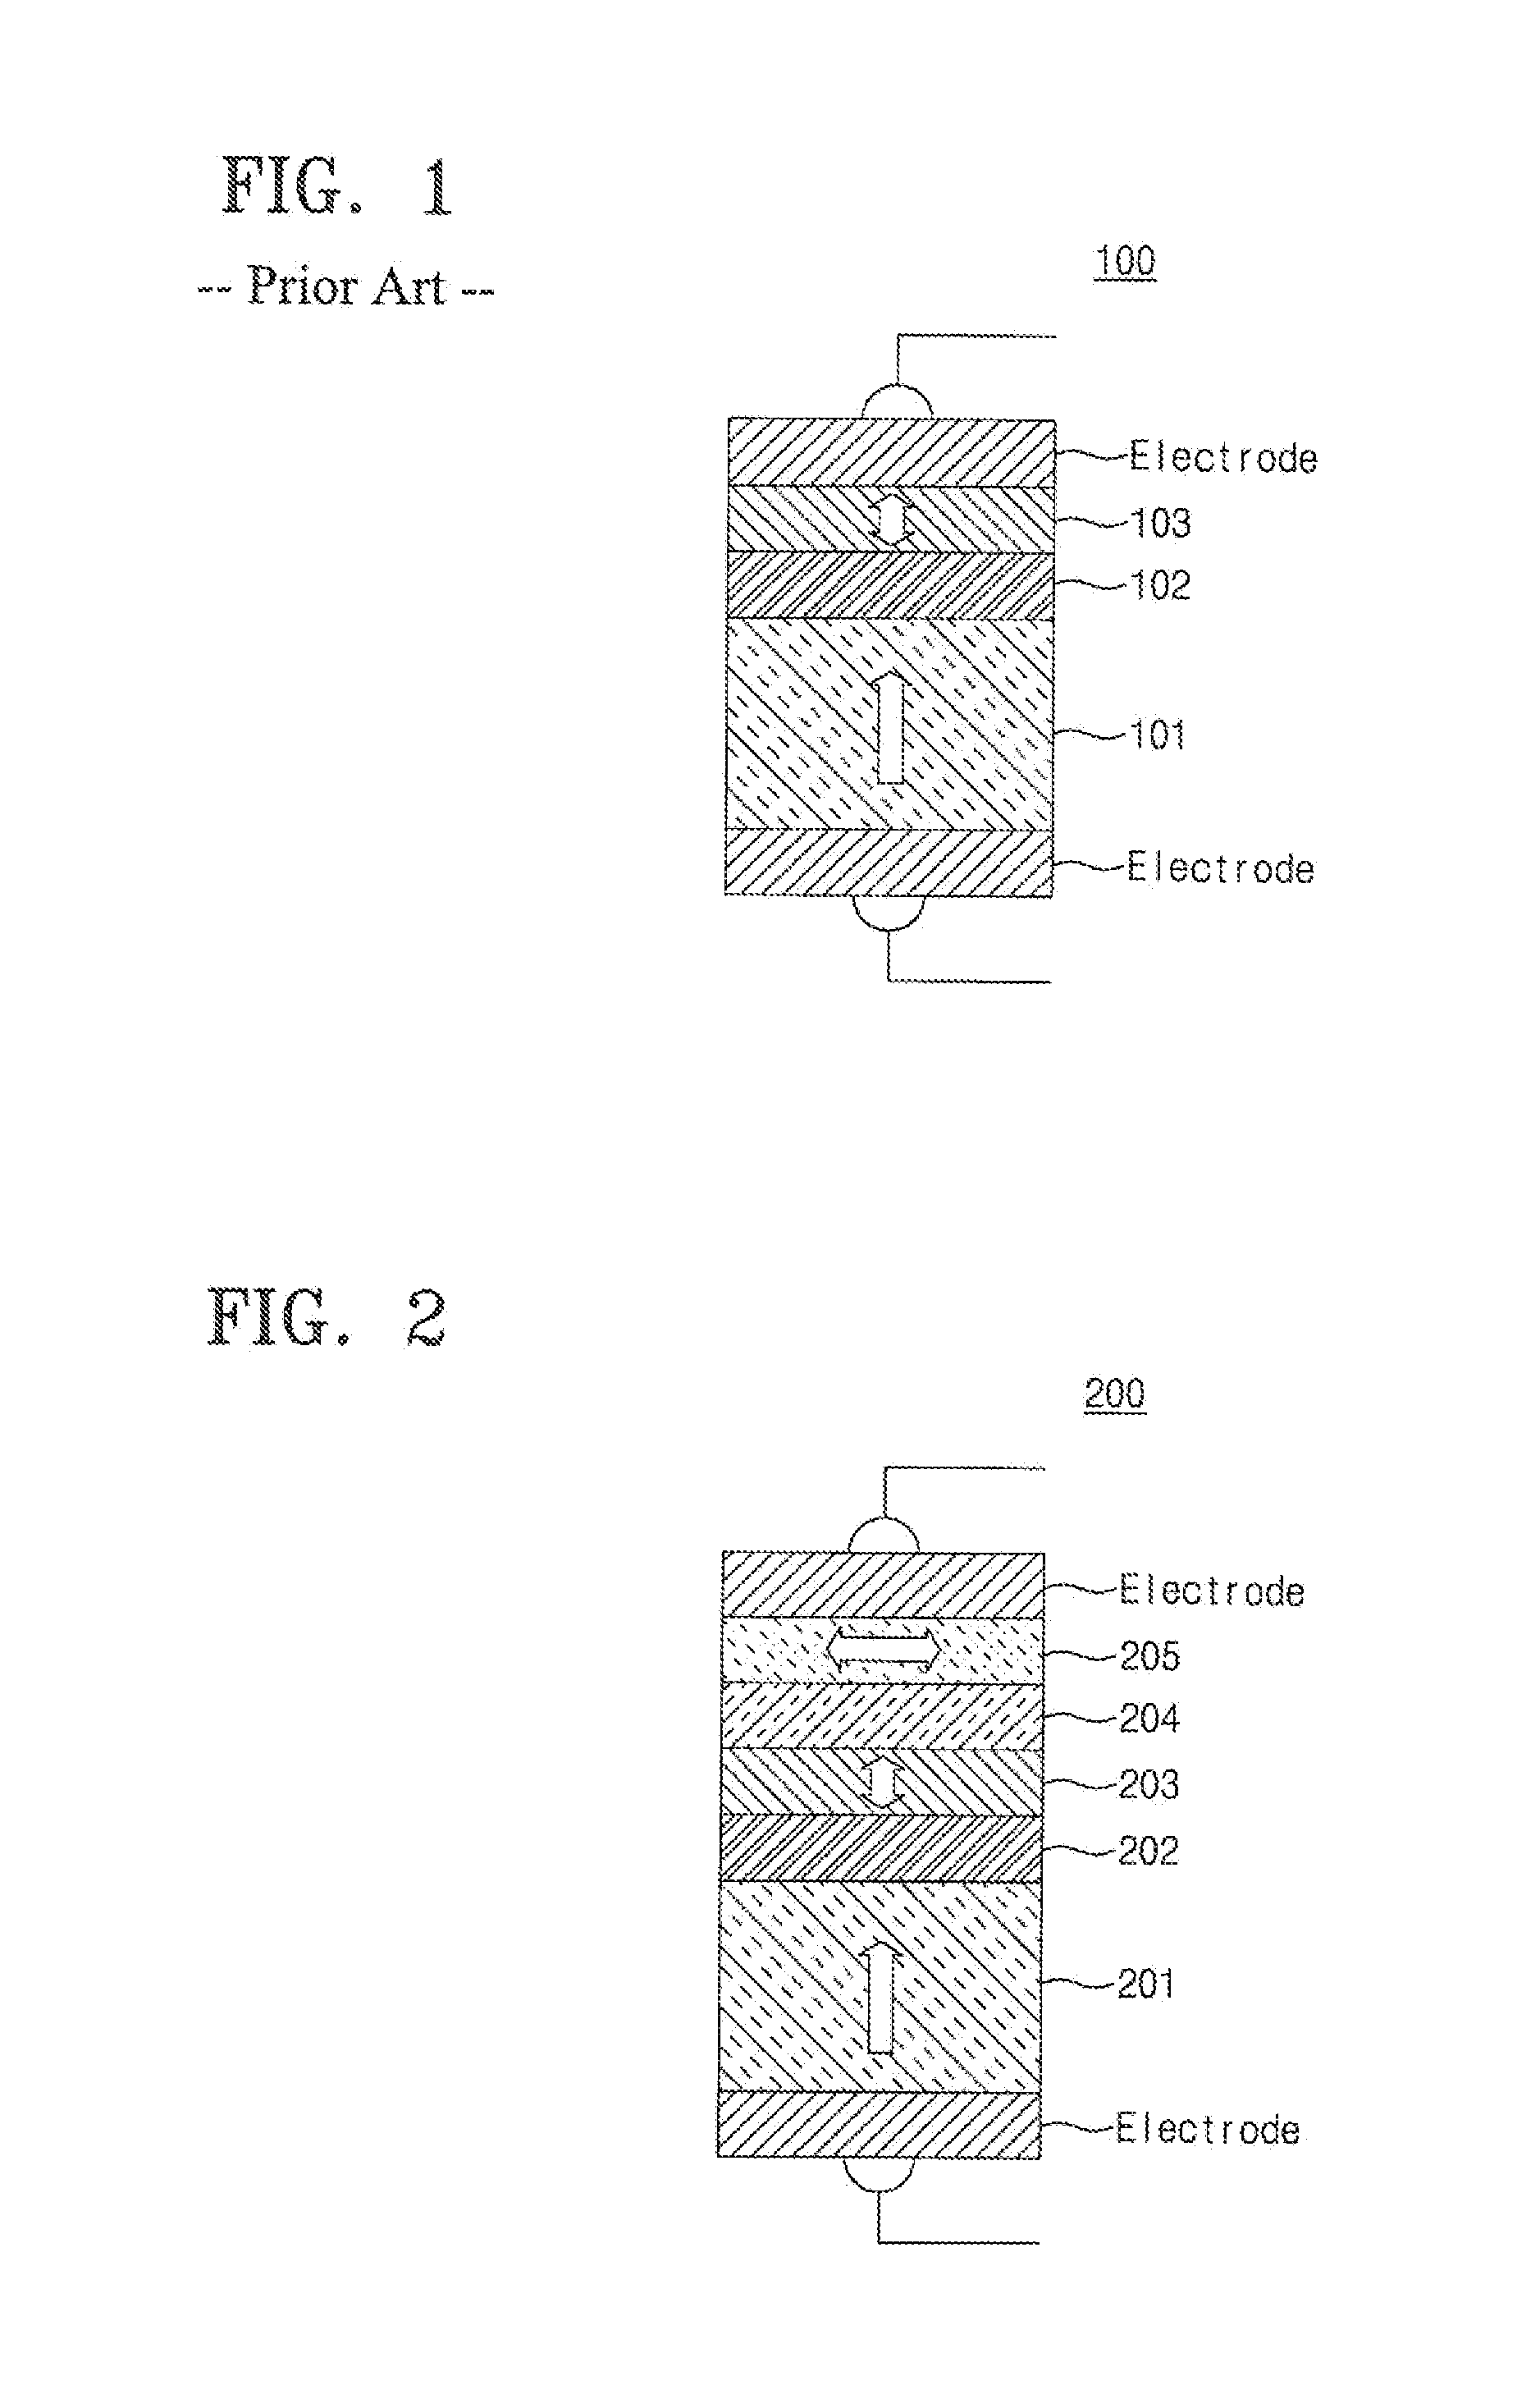 Spin transfer torque magnetic memory device using magnetic resonance precession and the spin filtering effect